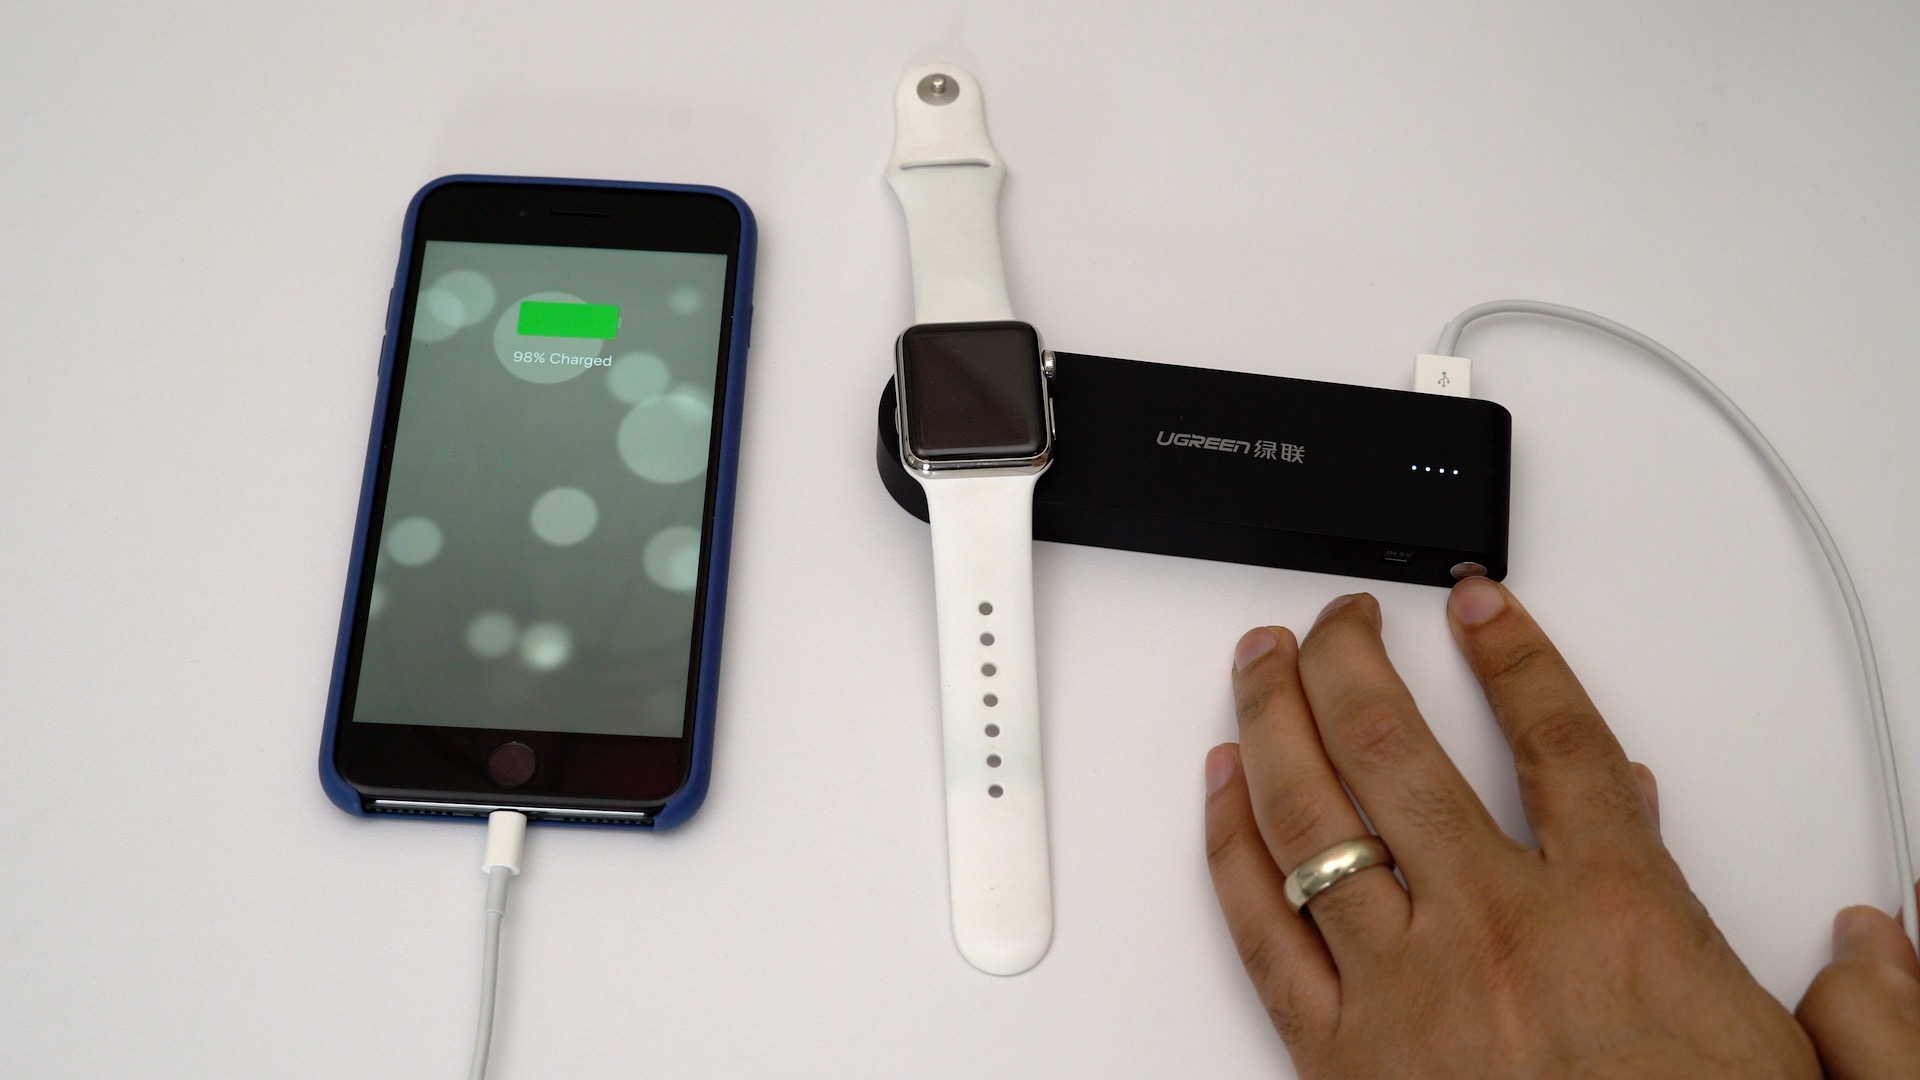 The Ugreen Apple Watch charger features portability and a builtin